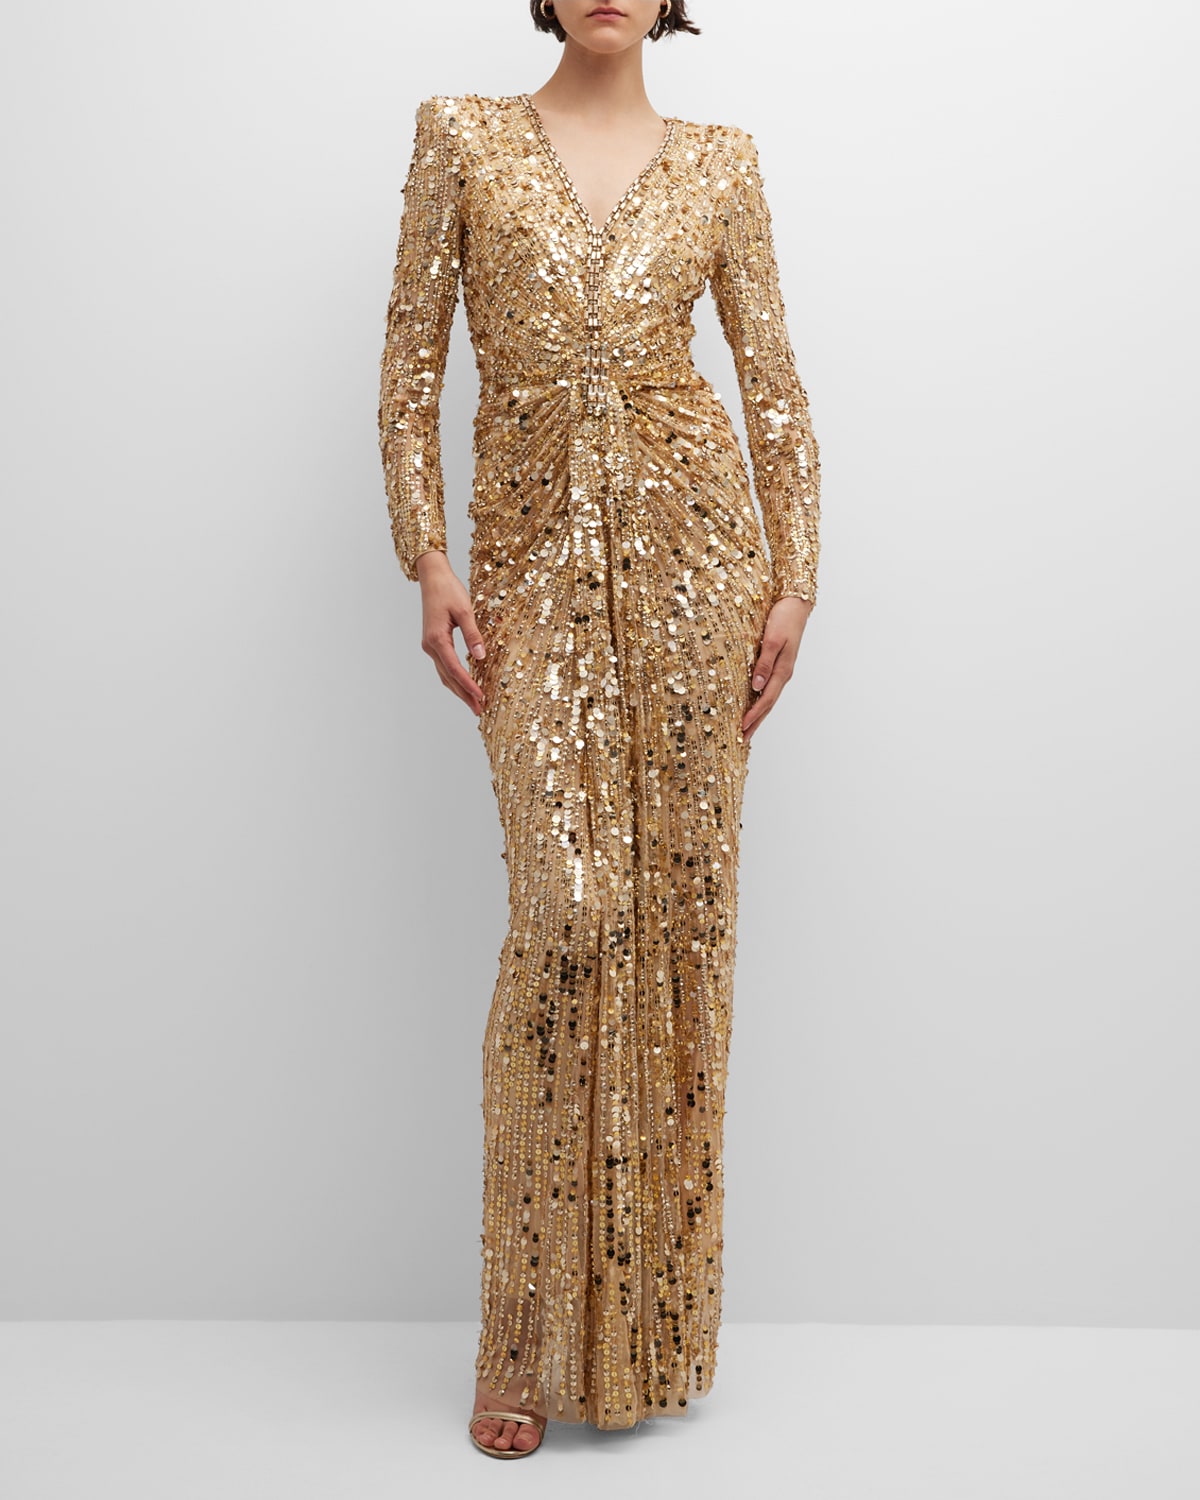 JENNY PACKHAM IMANI BEADED PLUNGING STRONG-SHOULDER GOWN